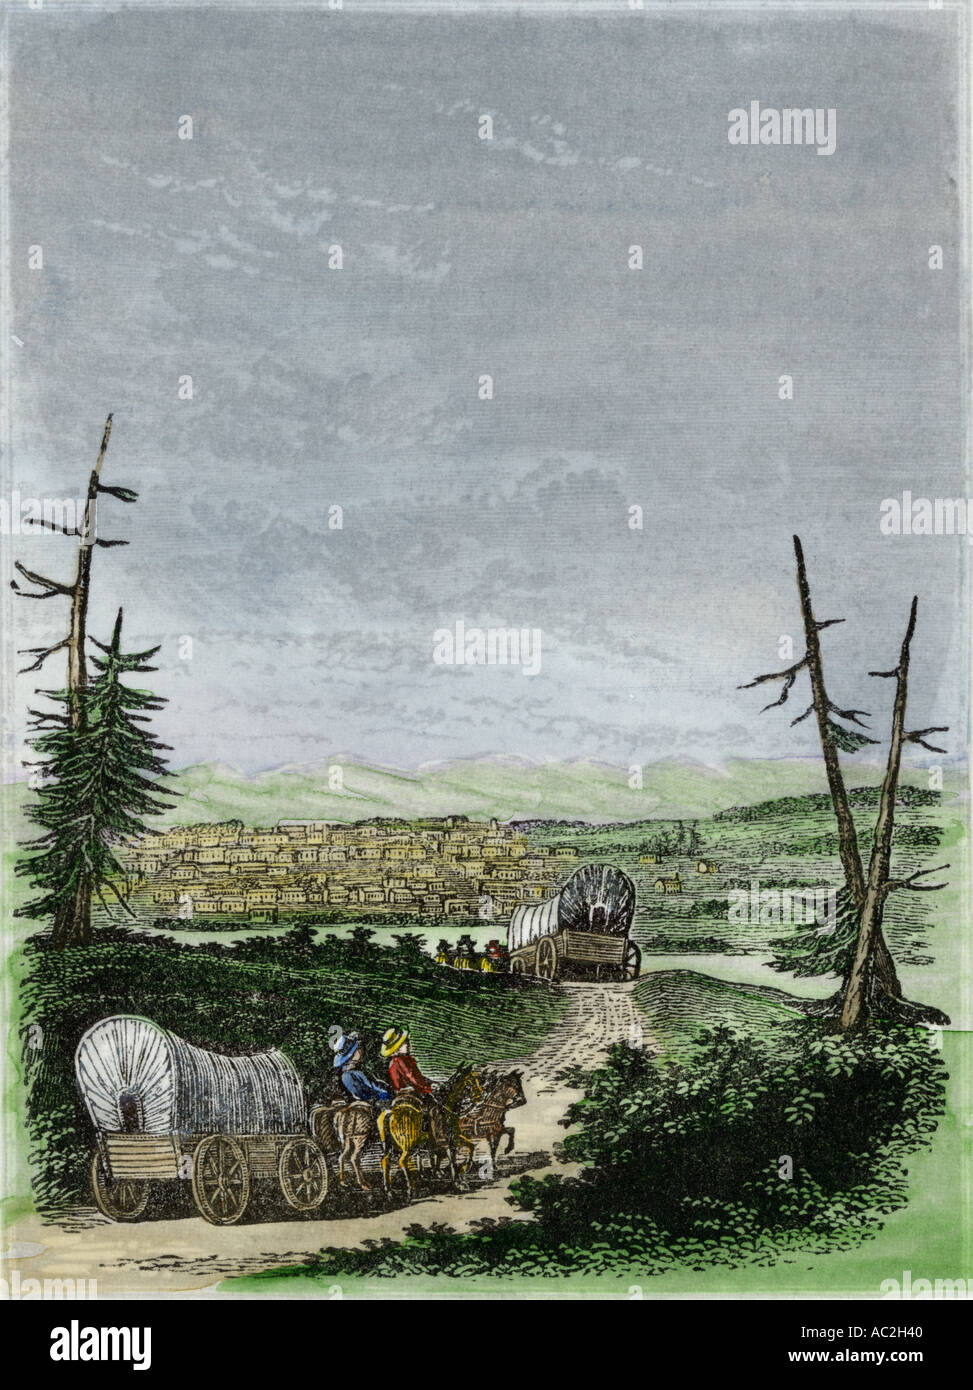 Covered wagons coming into Santa Fe New Mexico on the Santa Fe Trail 1850s. Hand-colored engraving Stock Photo